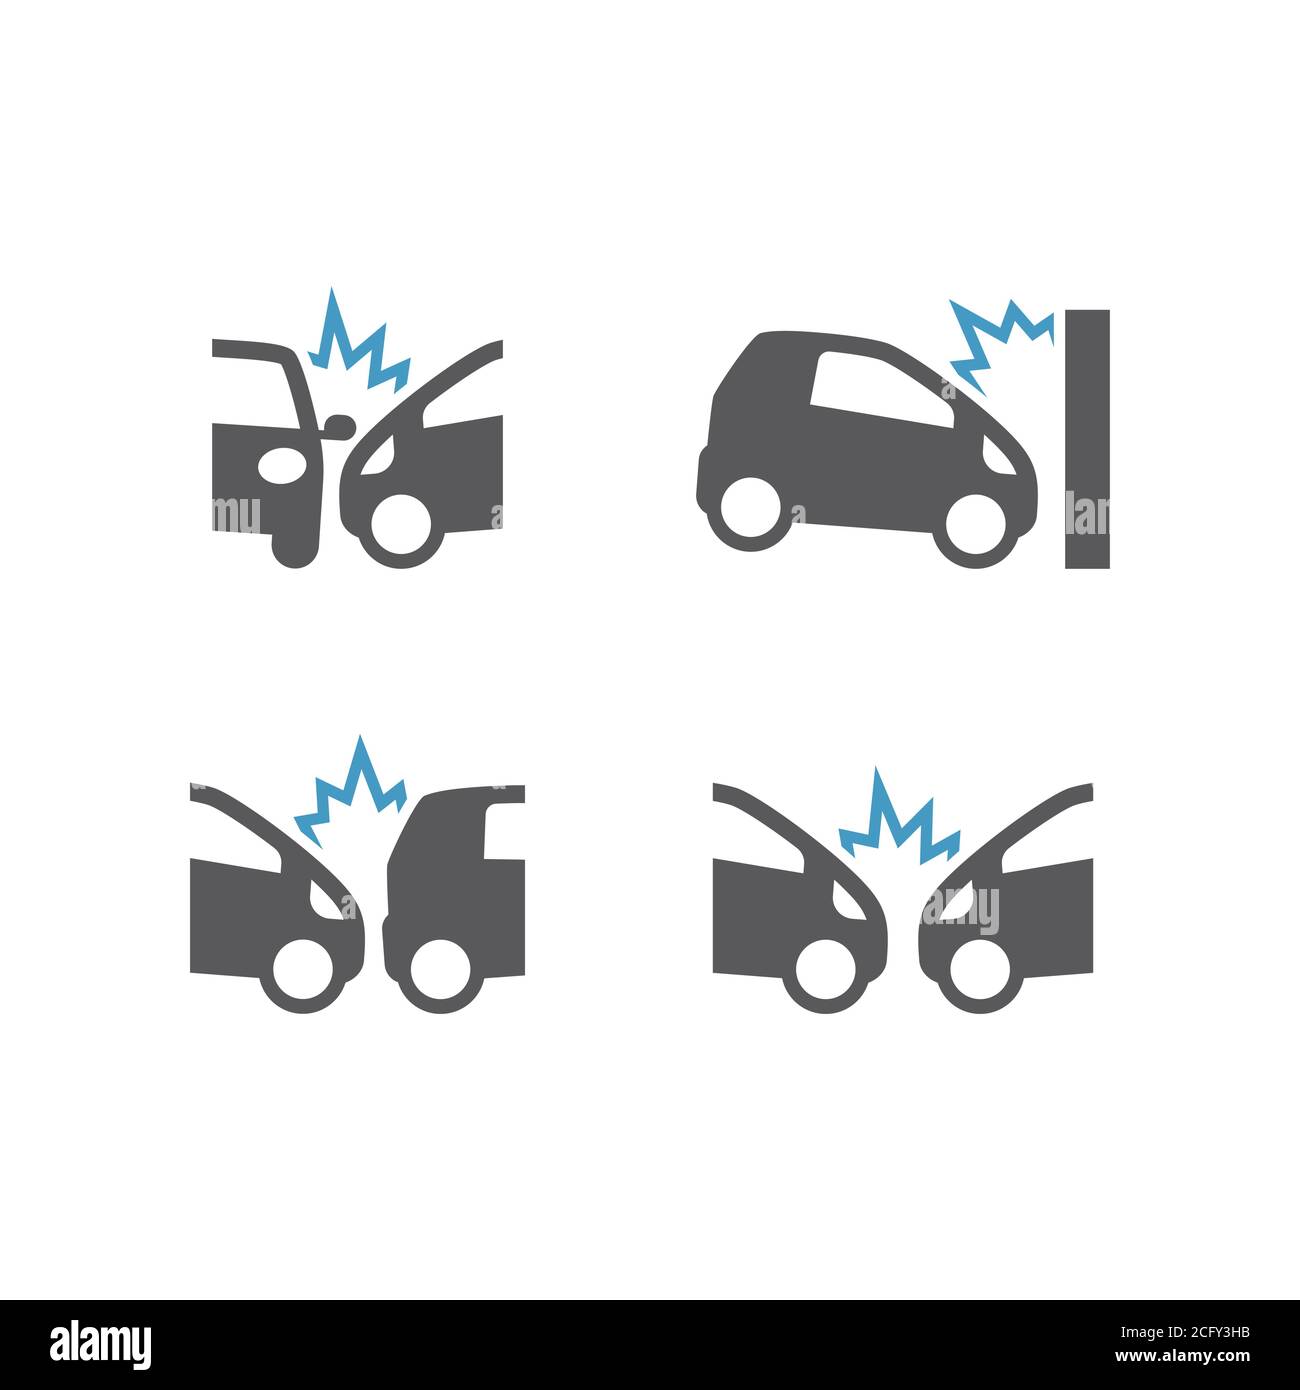 Car crush incident black vector icon set. Car or traffic accident, frontal and side collision icons. Stock Vector